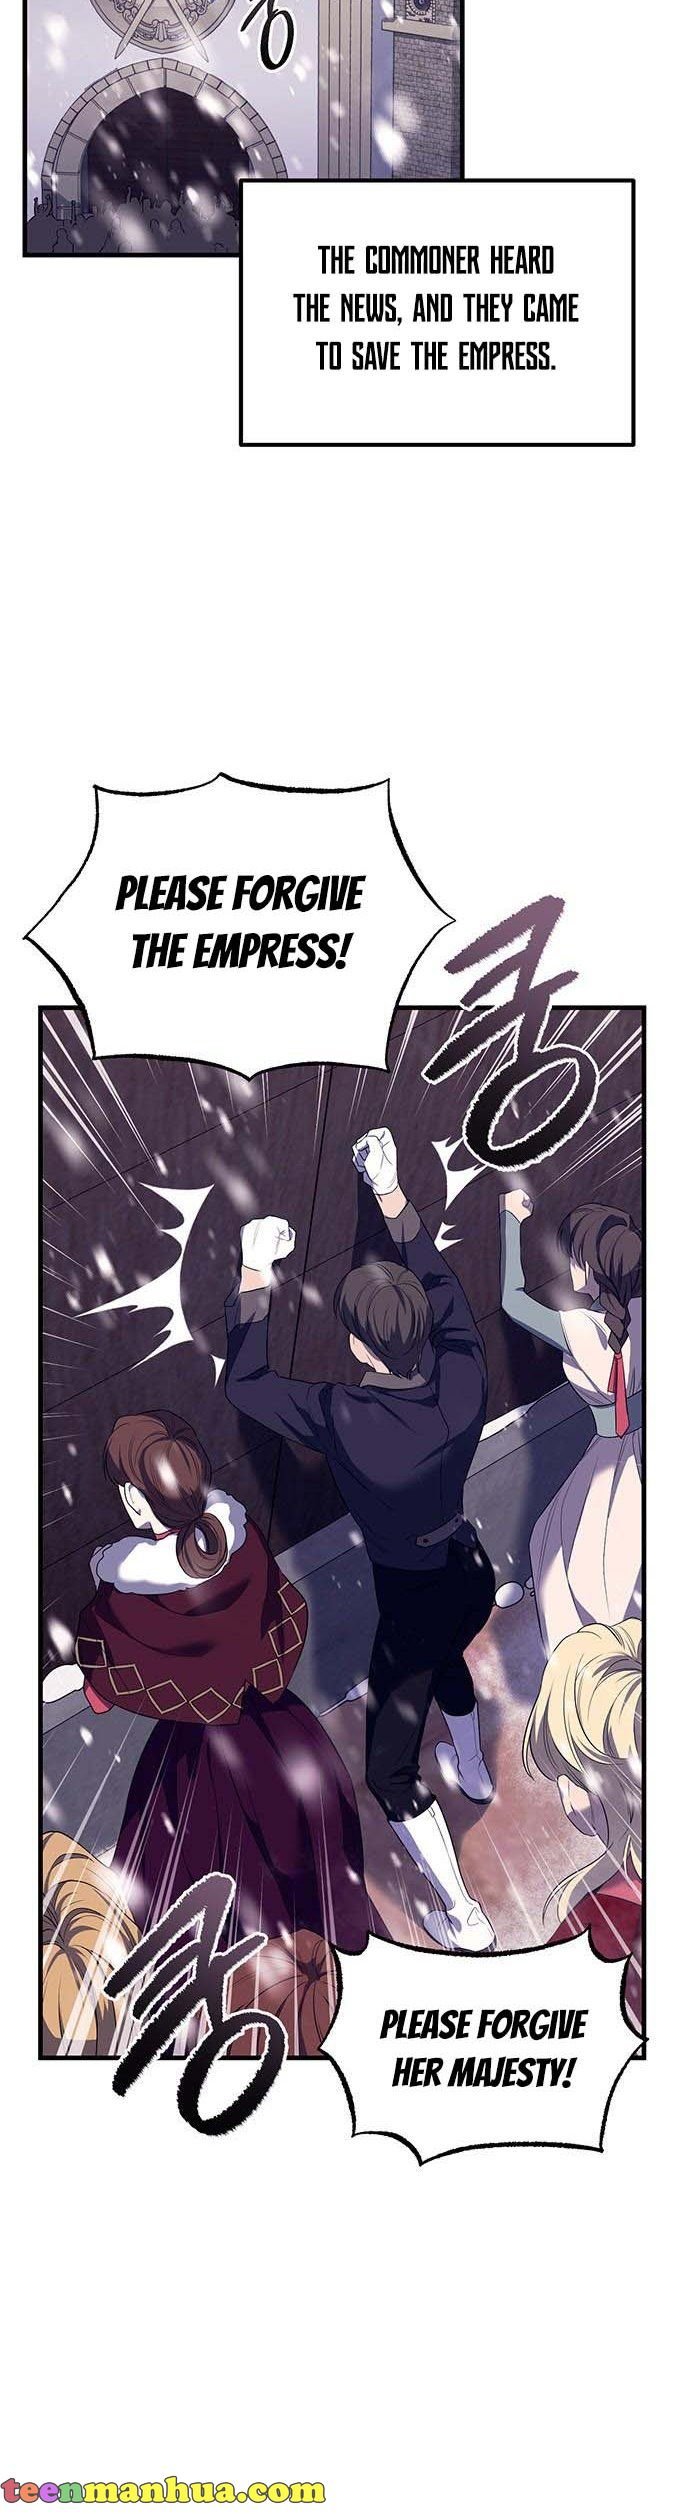 Who Kidnapped the Empress? chapter 2